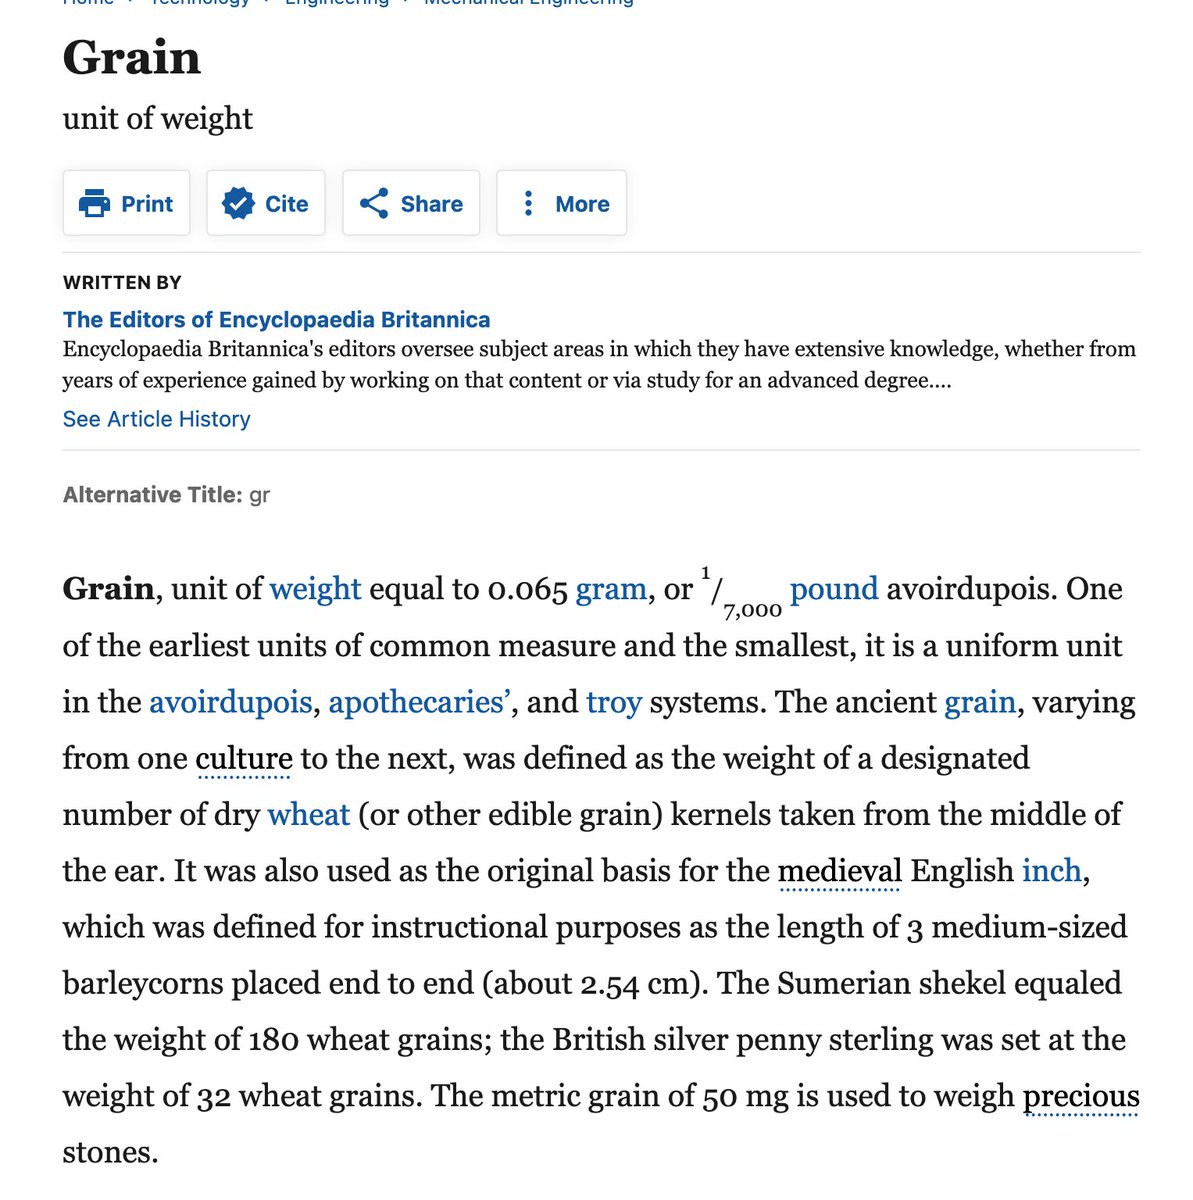 A “grain” was around 65 mg; it was formally set as 64.79891 milligrams in 1953. It was based on the weight of an idealized barley cereal grain (!) and had ancient, Bronze Age trading roots. Of course, the weight of a cereal grain varies based on humidity, specific plant, etc./22